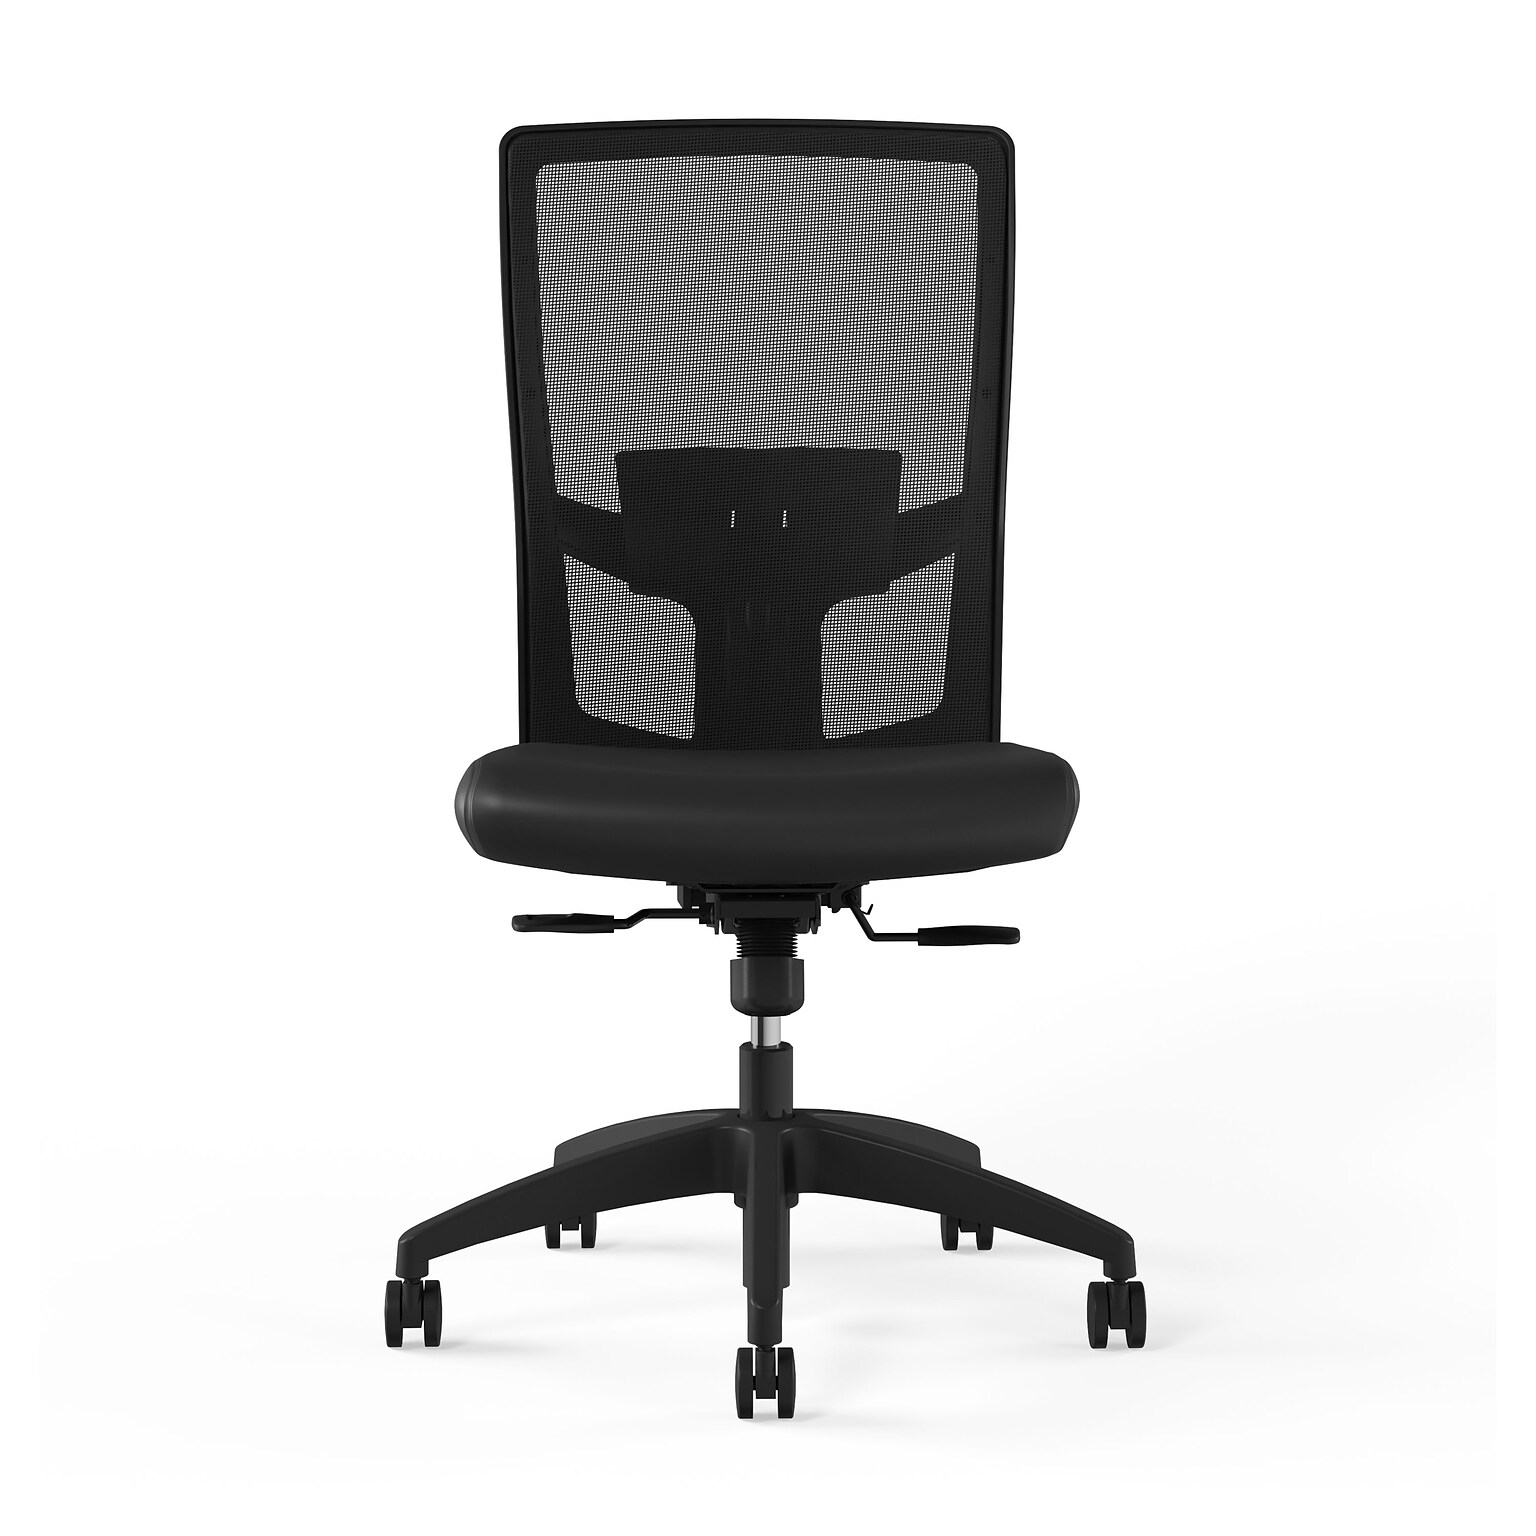 Union & Scale™ Workplace2.0™ 500 Series Armless Vinyl Task Chair, Black 52266)